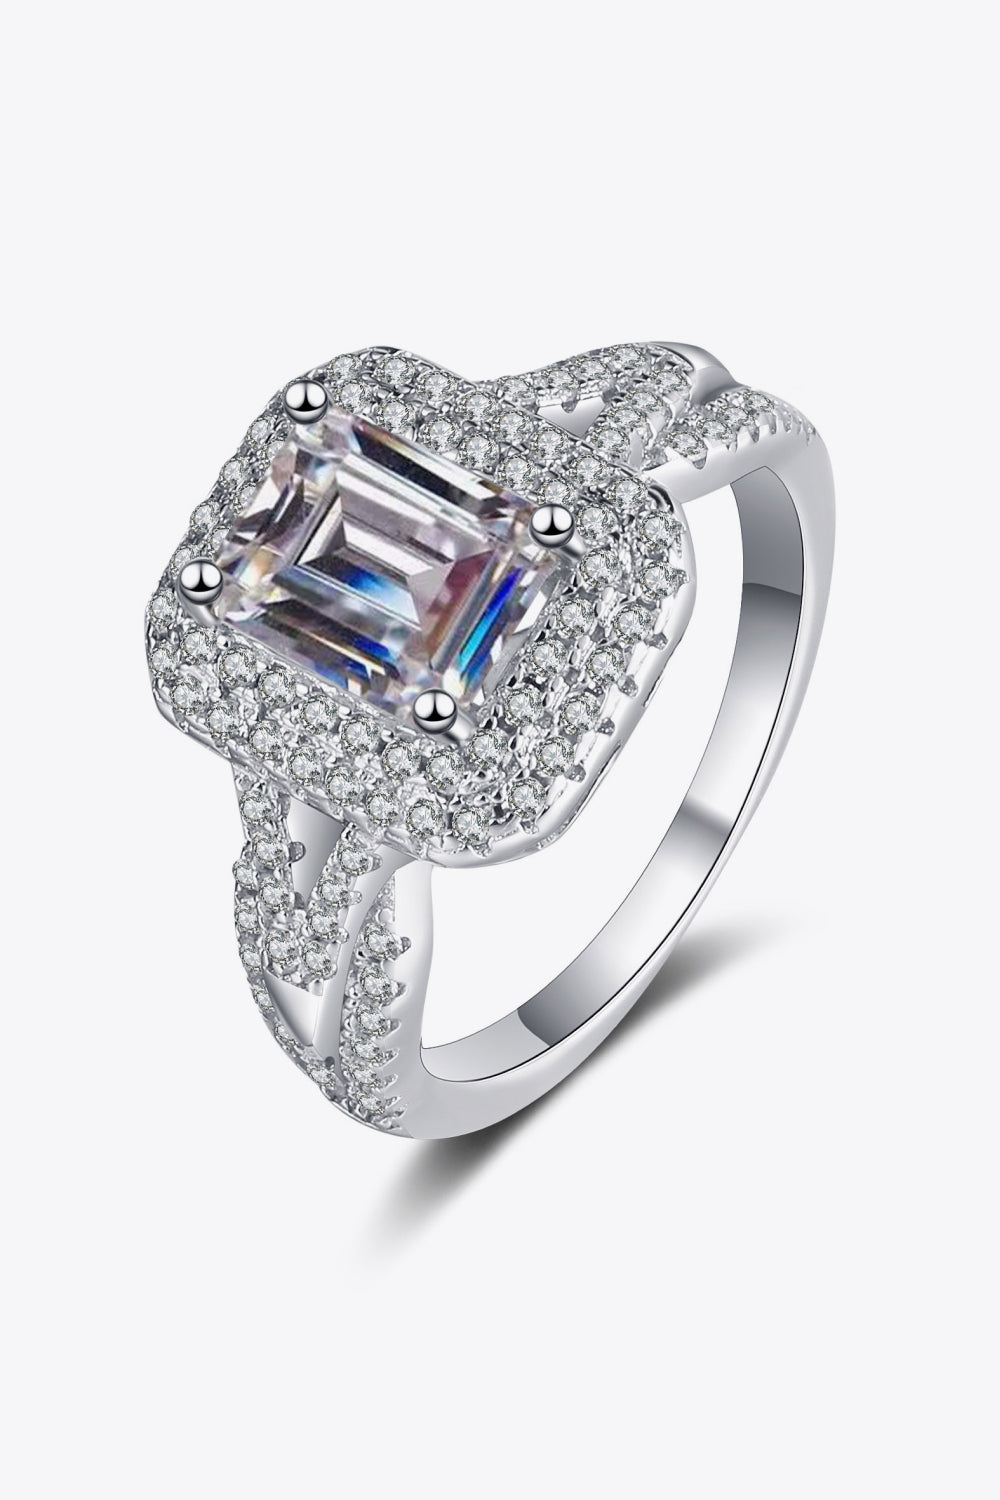 Can't Stop Your Shine 2 Carat Moissanite Ring - Ryzela